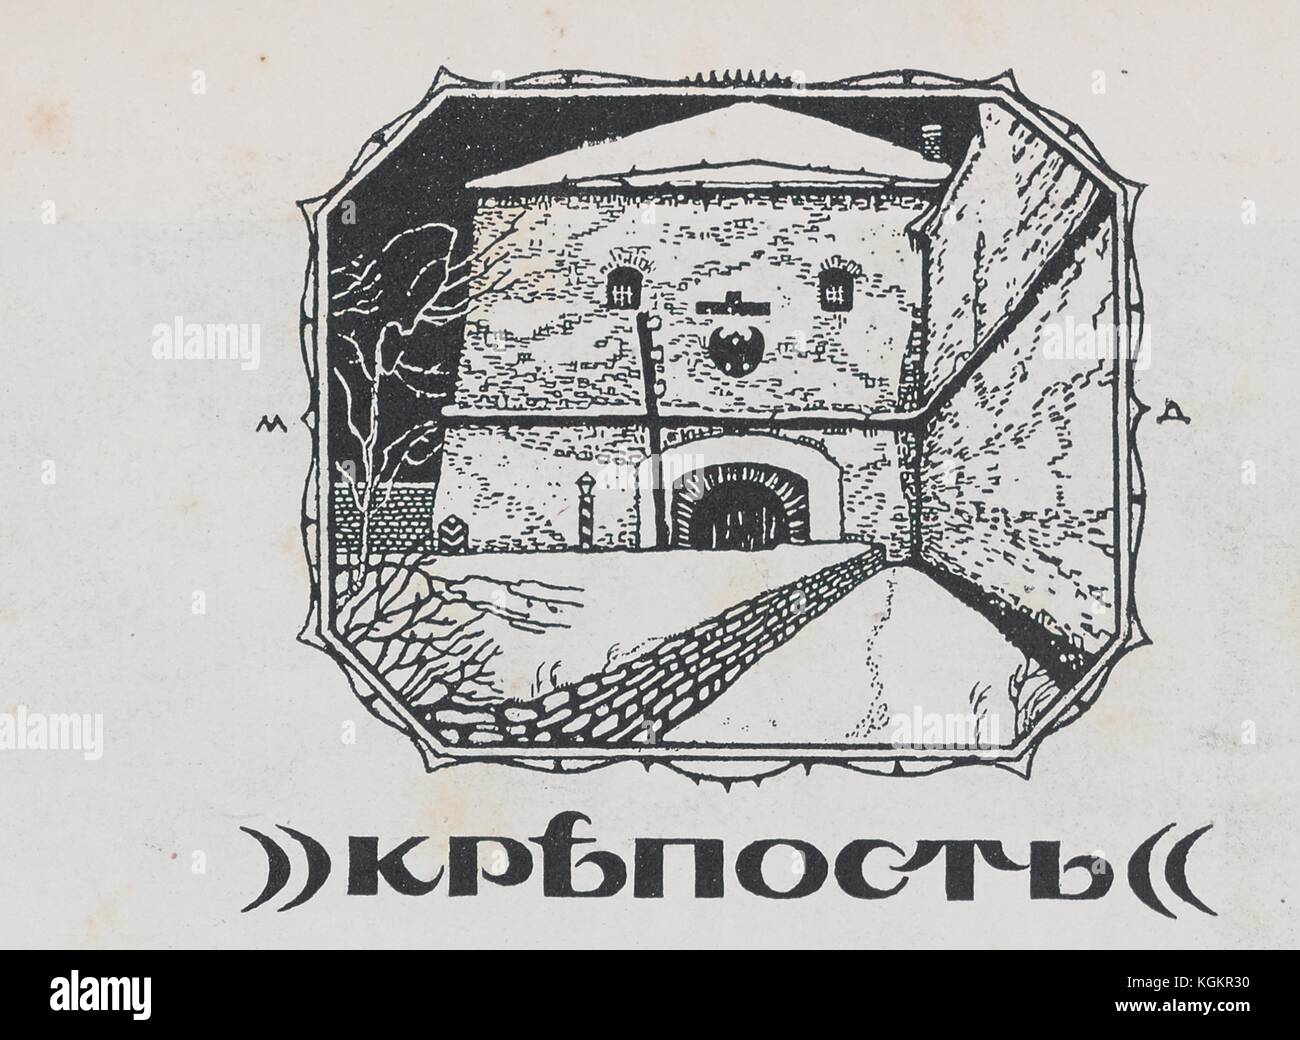 Illustration from the Russian satirical journal Adskaia Pochta (Infernal Mail) of a fortress at night, with text reading 'fortress', likely depicting the Russian Fortress of Sveaborg, 1906. Stock Photo